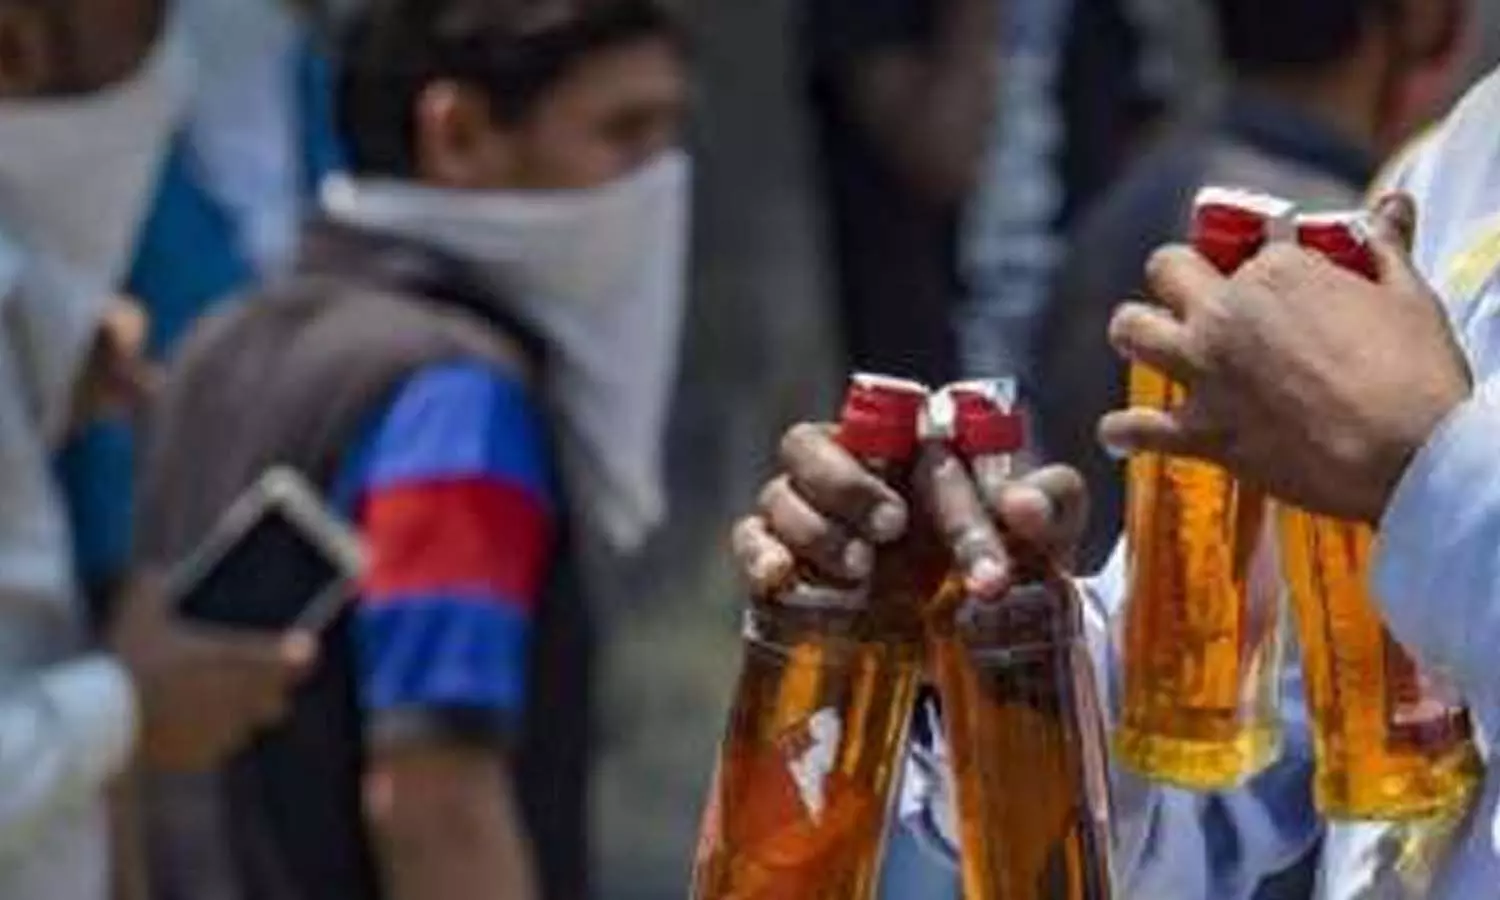 Fake liquor being sold through empty vials of government liquor, police is sitting silent